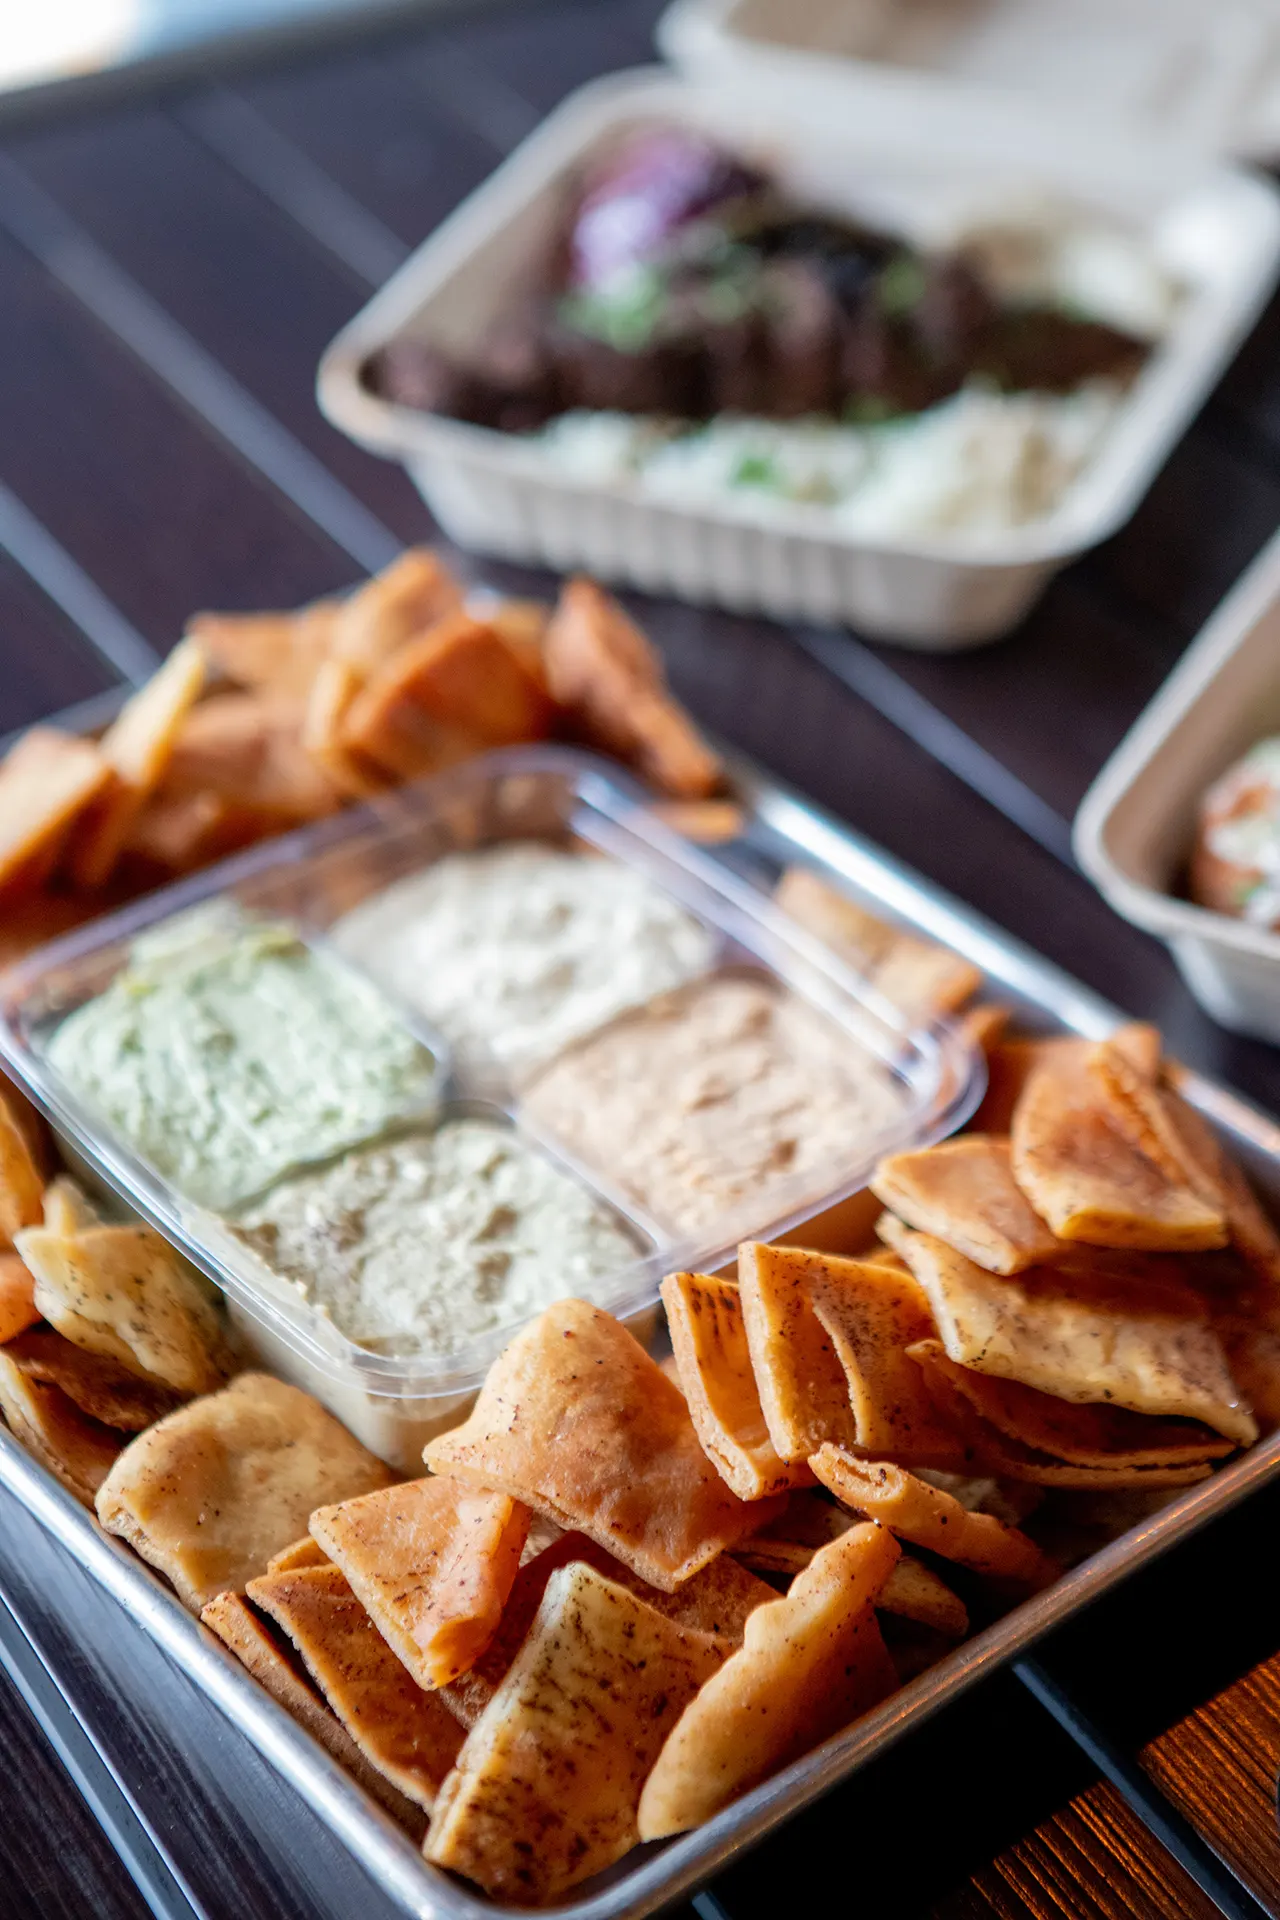 A Party Pack served with Classic Hummus, Cilantro Jalapeño Hummus, Roasted Tomato Habanero Hummus, and Cumin Lime Hummus, surrounded by Pita chips. A Beef Kafta Kabob platter is placed in the background.